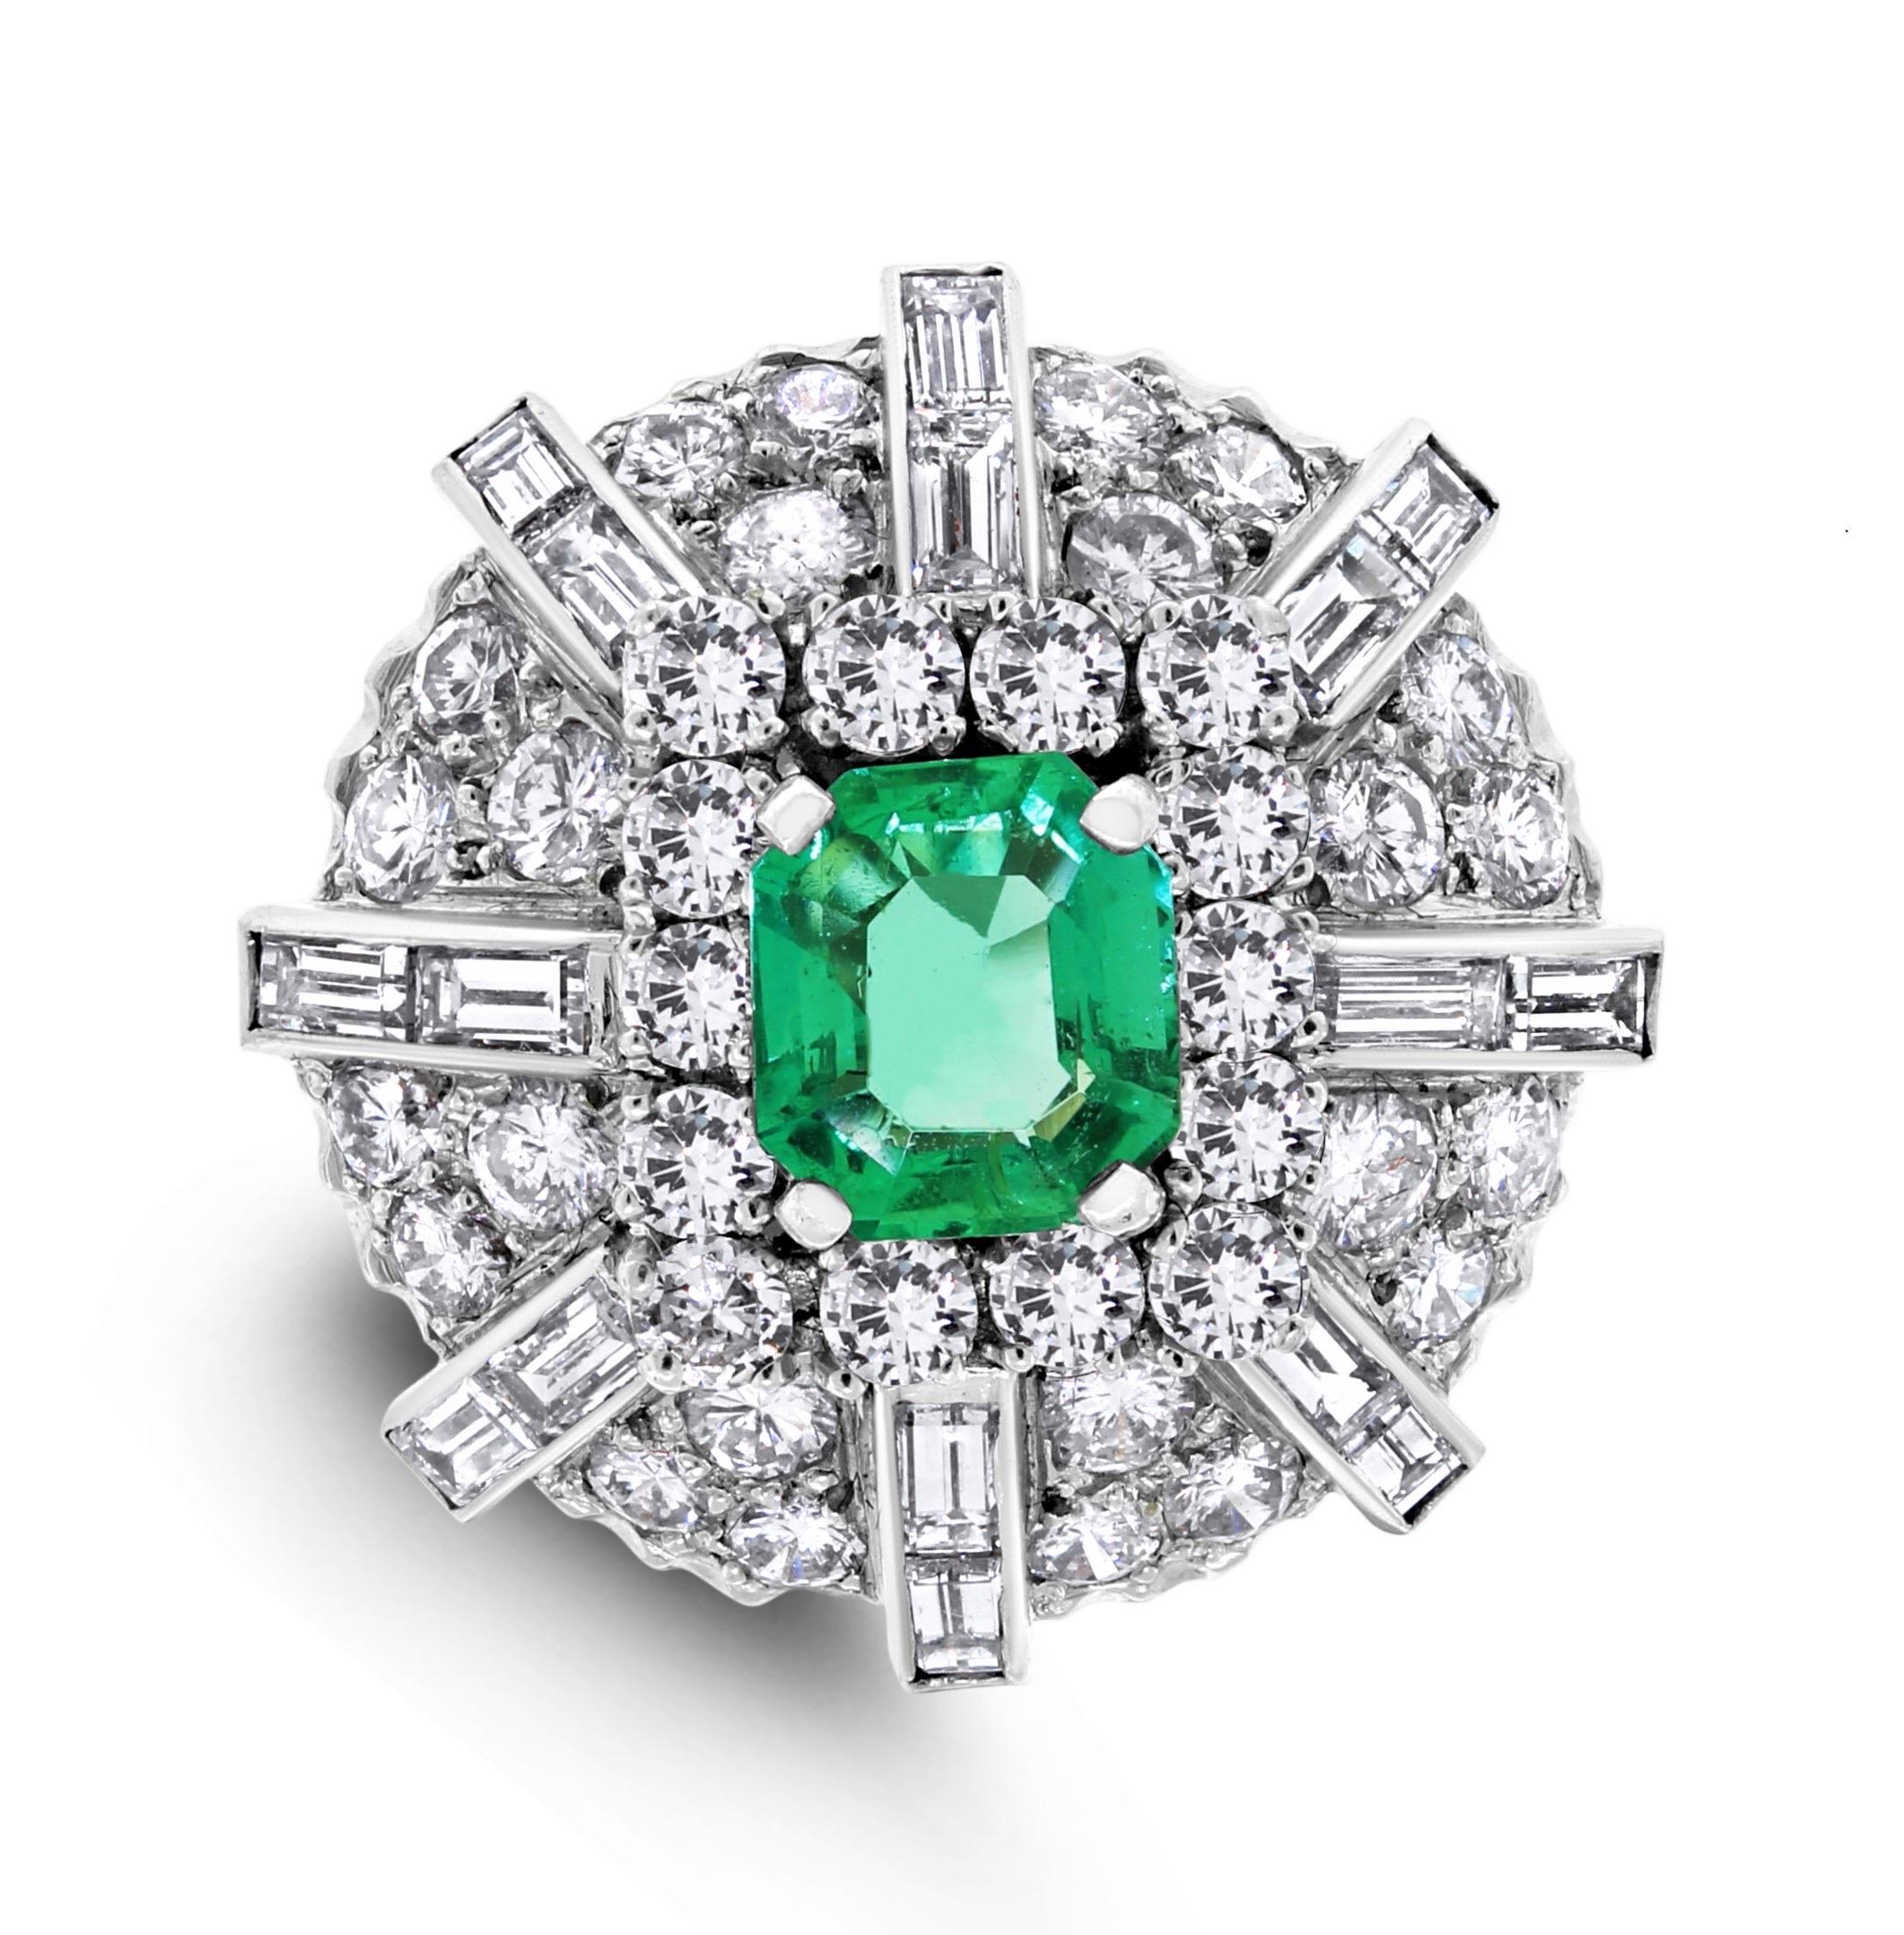 A blend of the old and new, this ring features an antique dome with modern diamond shapes set around an impressive Colombian emerald.

Gemstones Type: Emerald
Gemstones Shape: Rectangular
Gemstones Weight: 1.50 ct
Gemstone Origin: Colombia
Gemstones